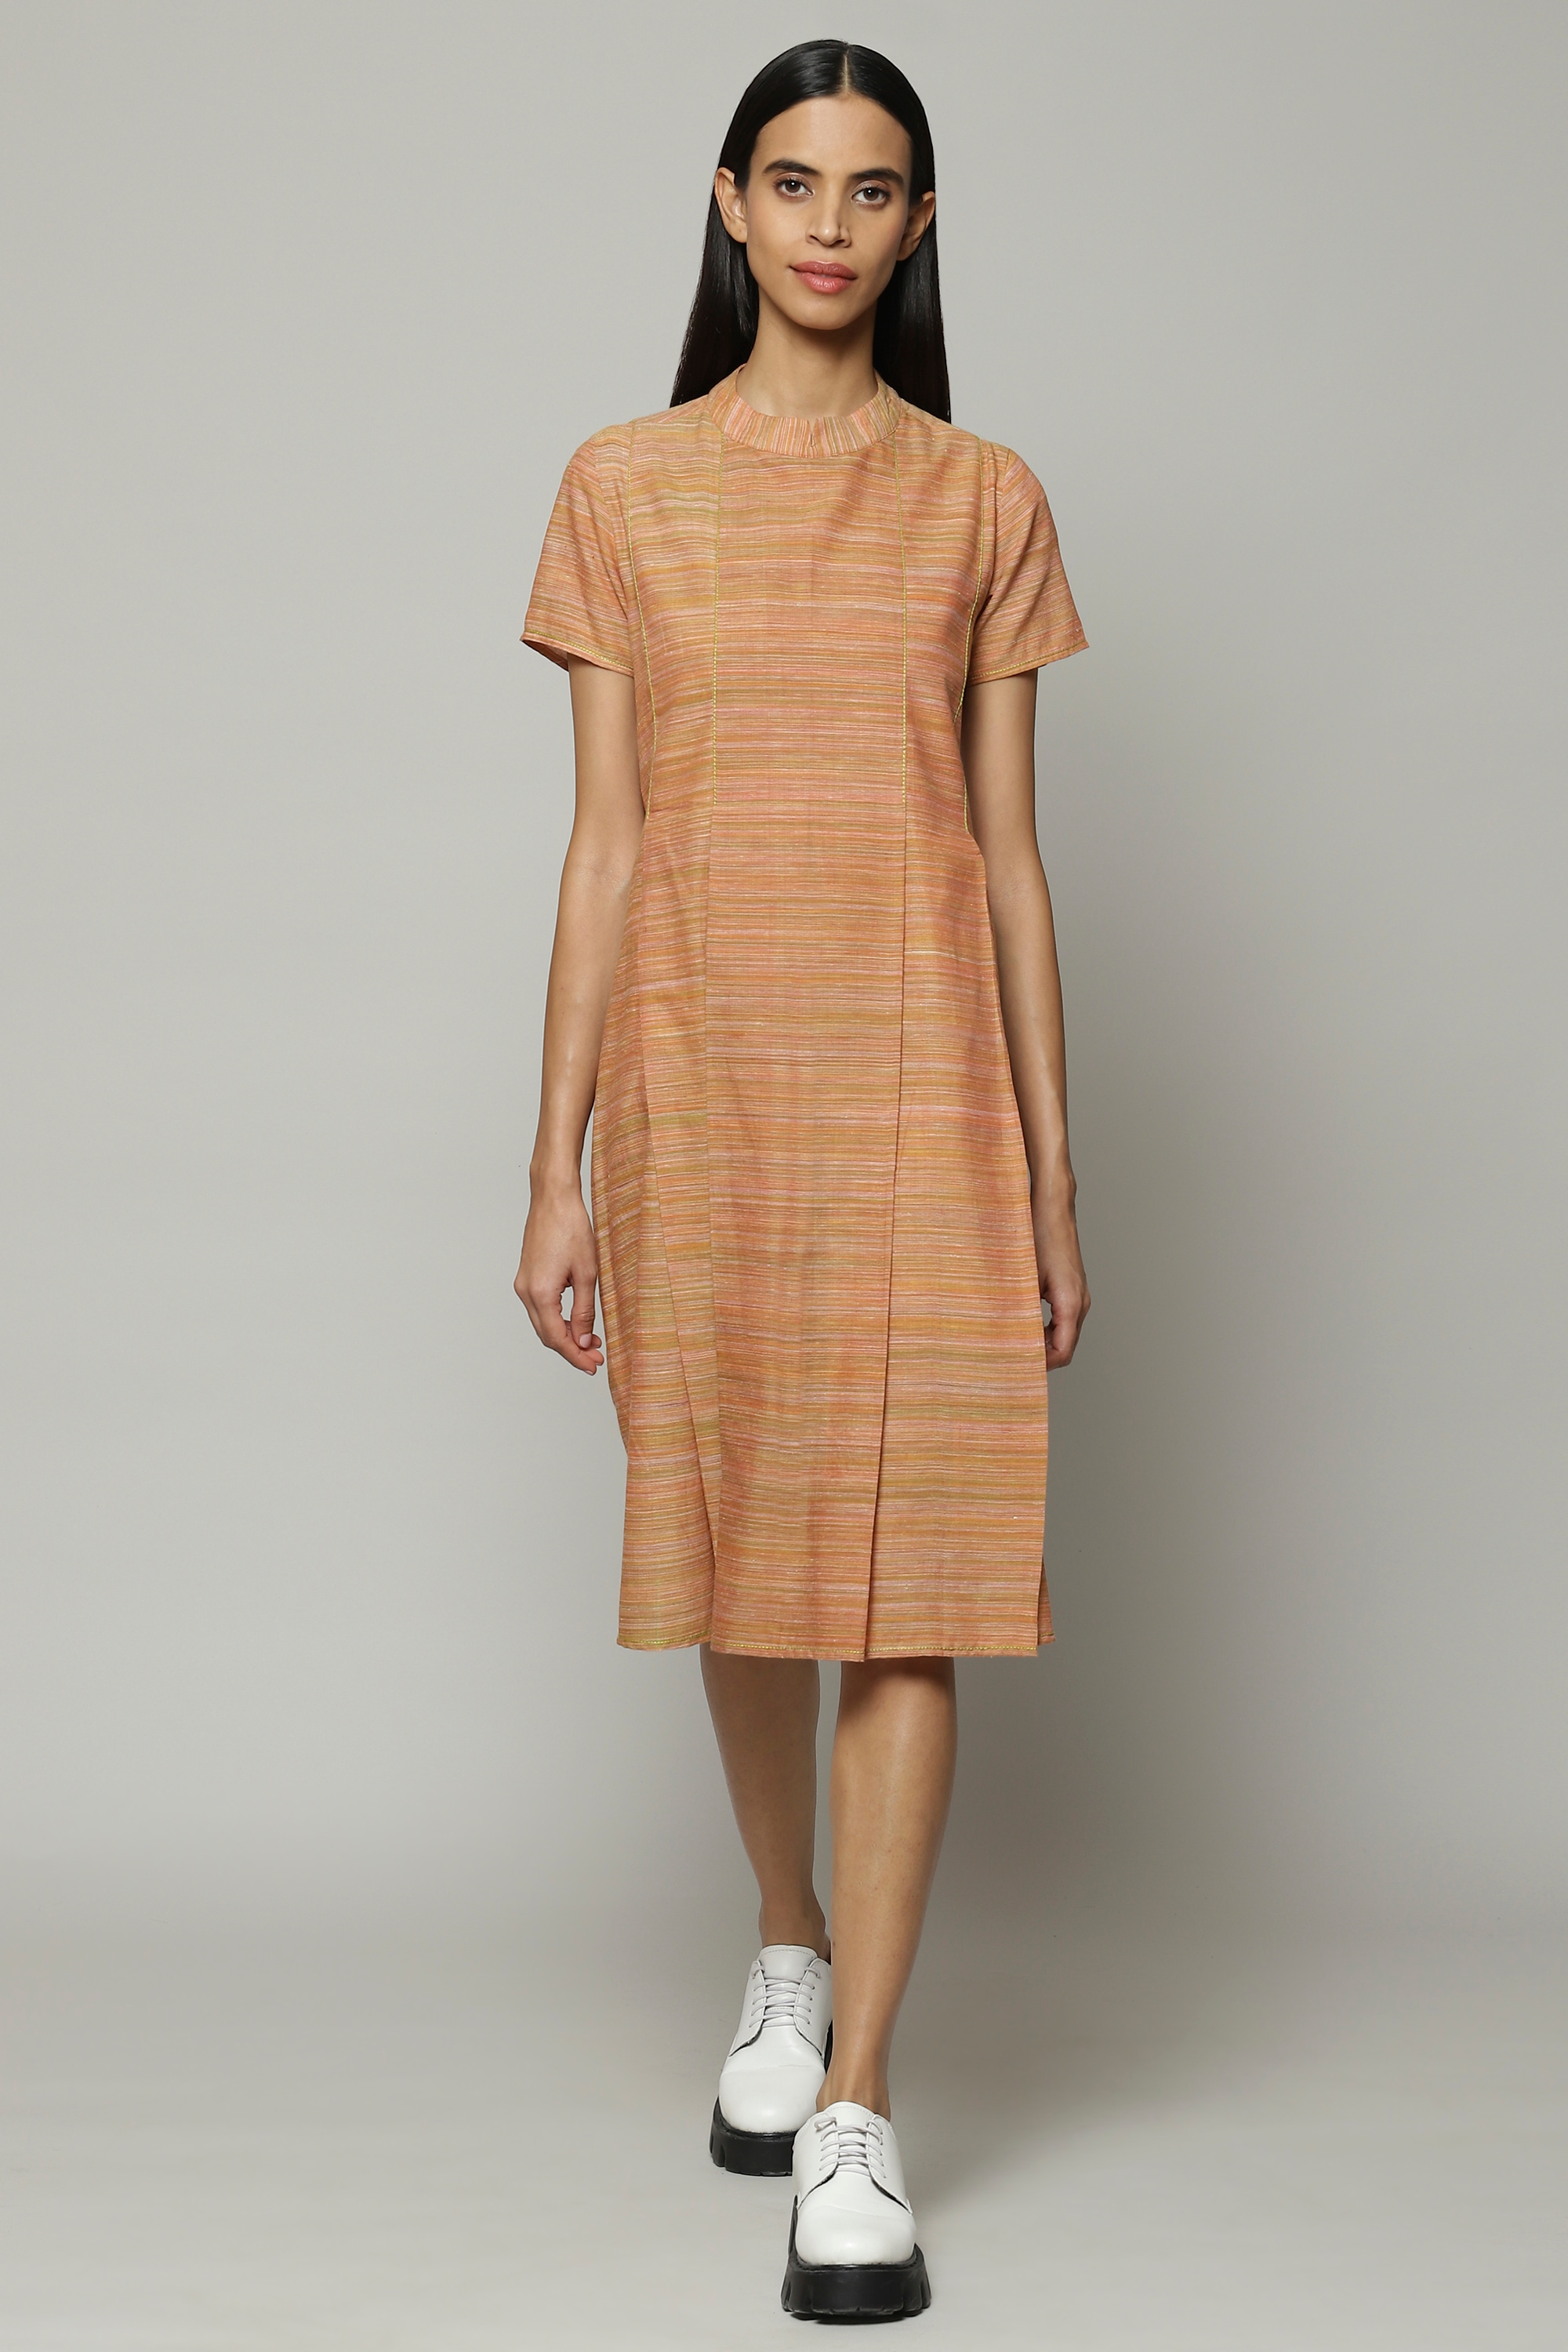 ABRAHAM AND THAKORE | Space Dyed Handspun Handwoven Tencel Cotton Dress